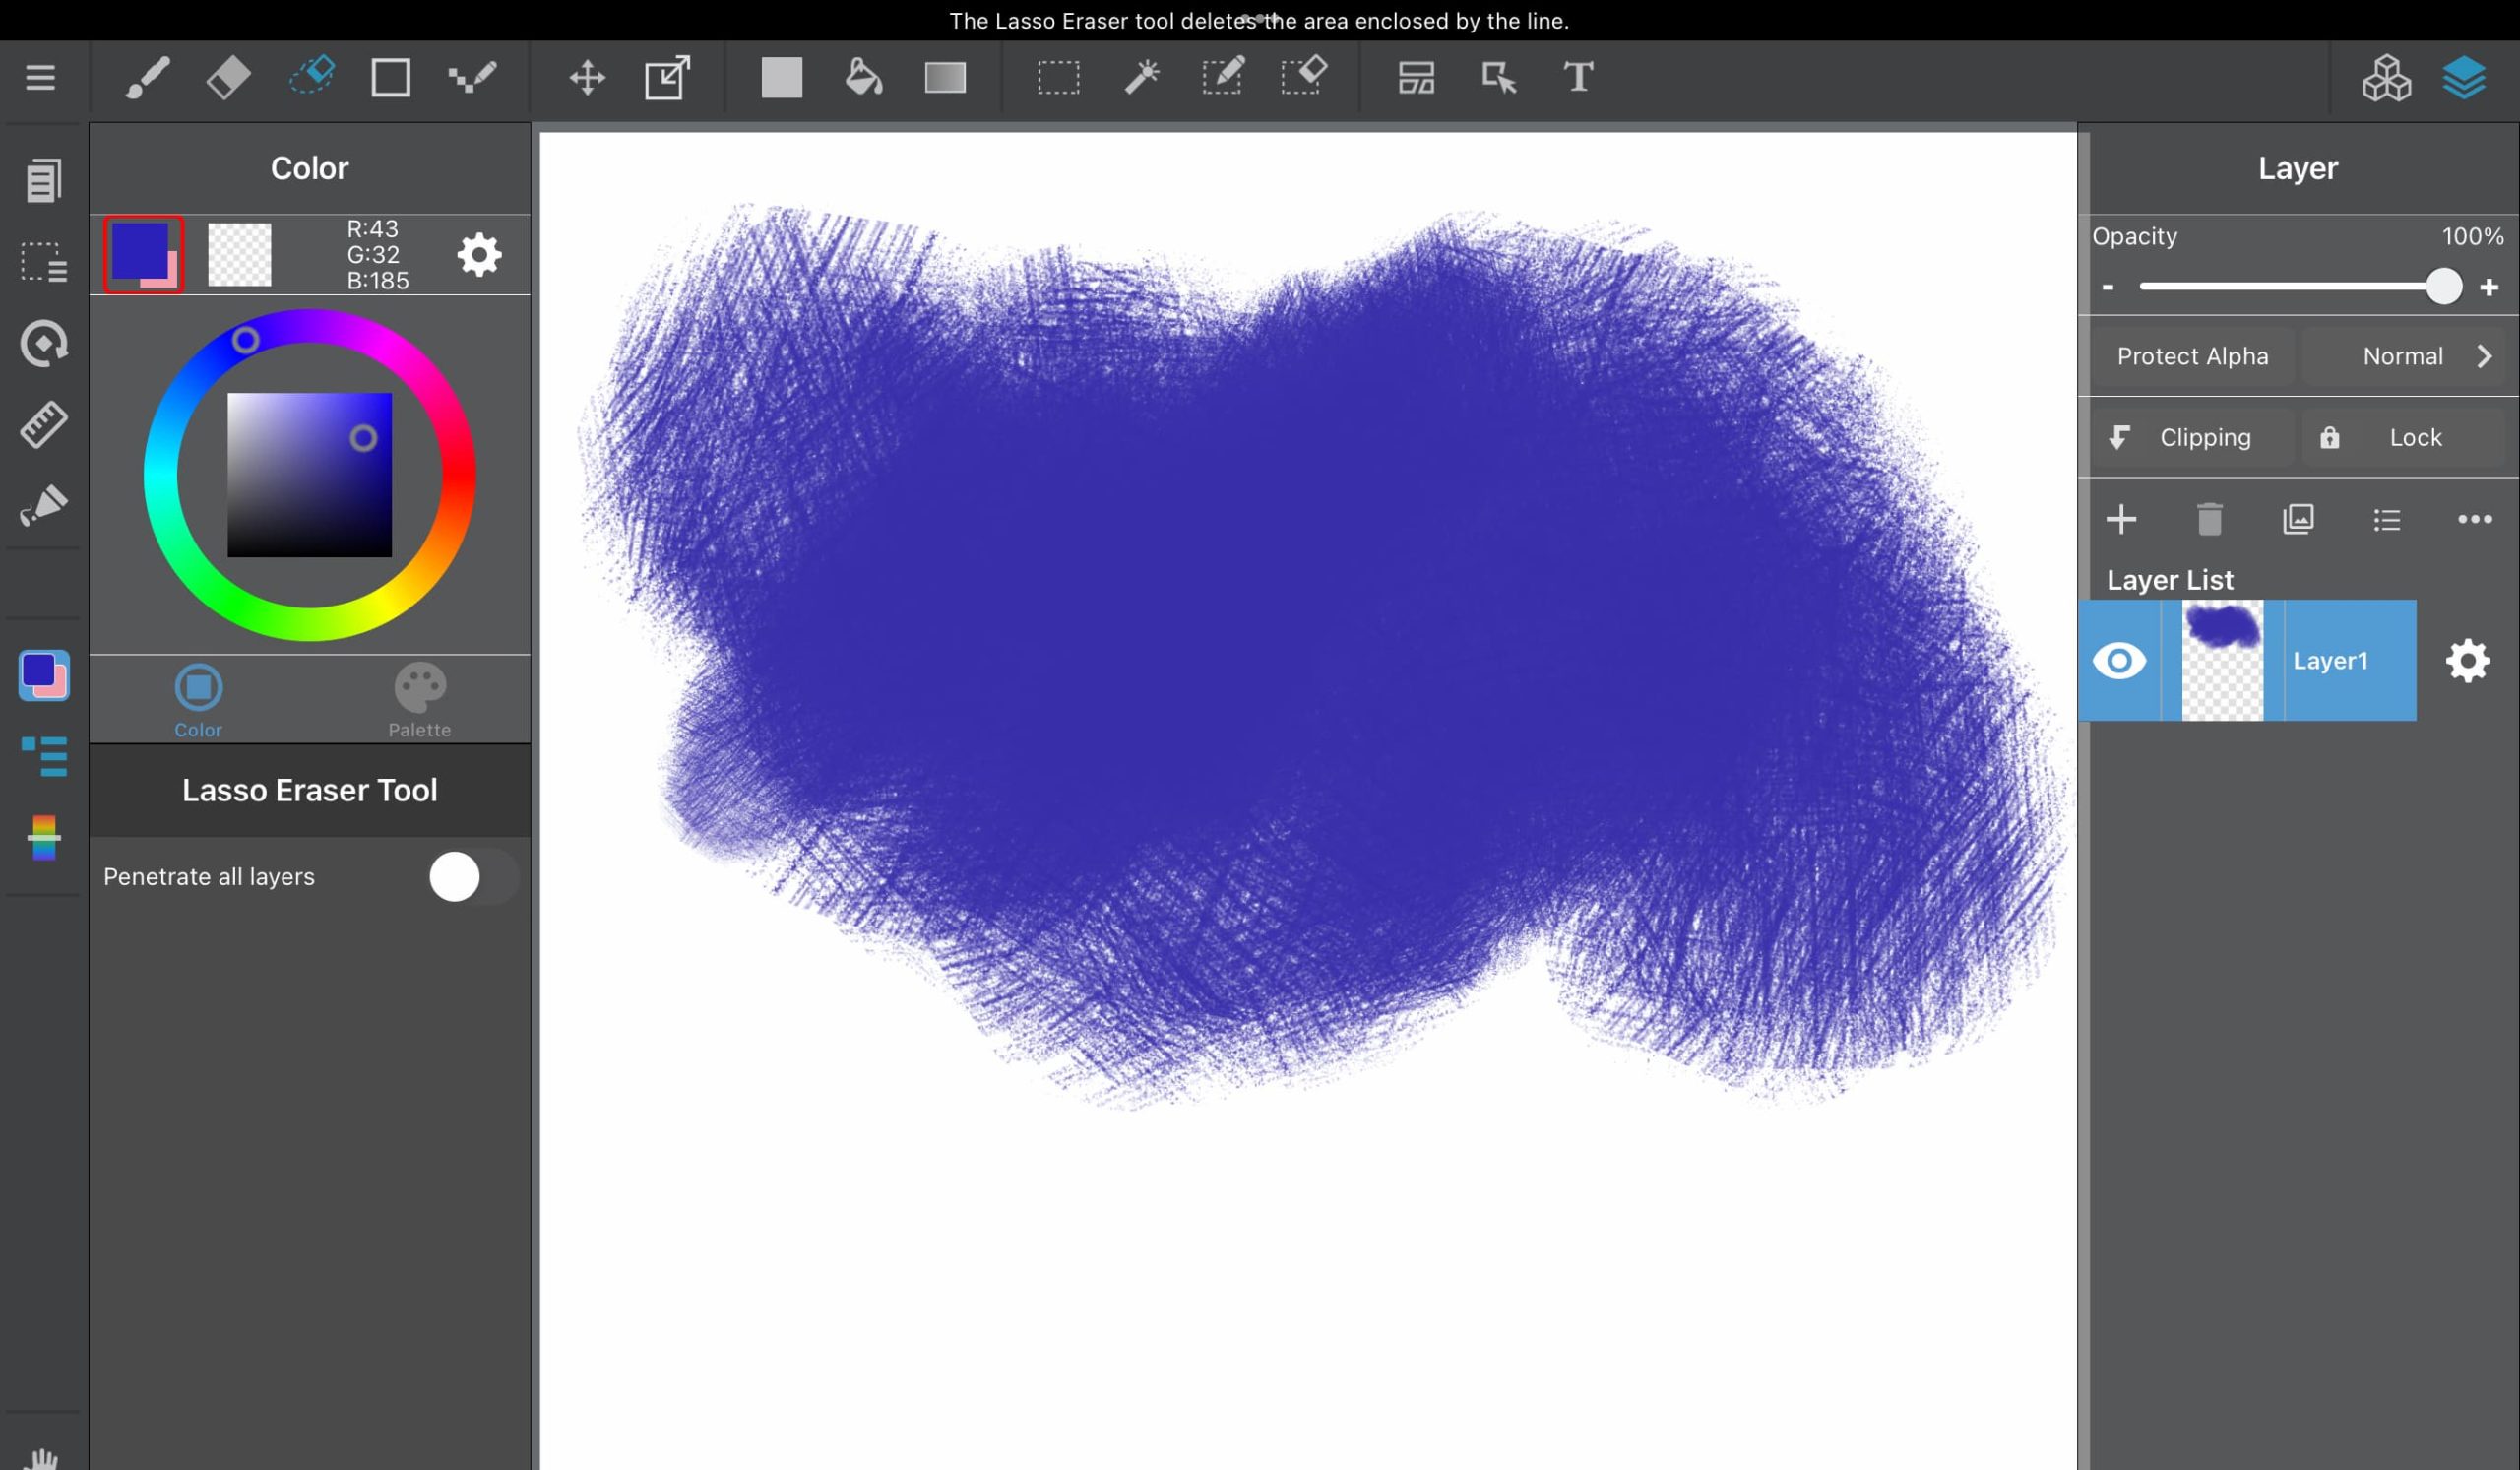 [iPad] How to Use the Eraser(Lasso) Tool